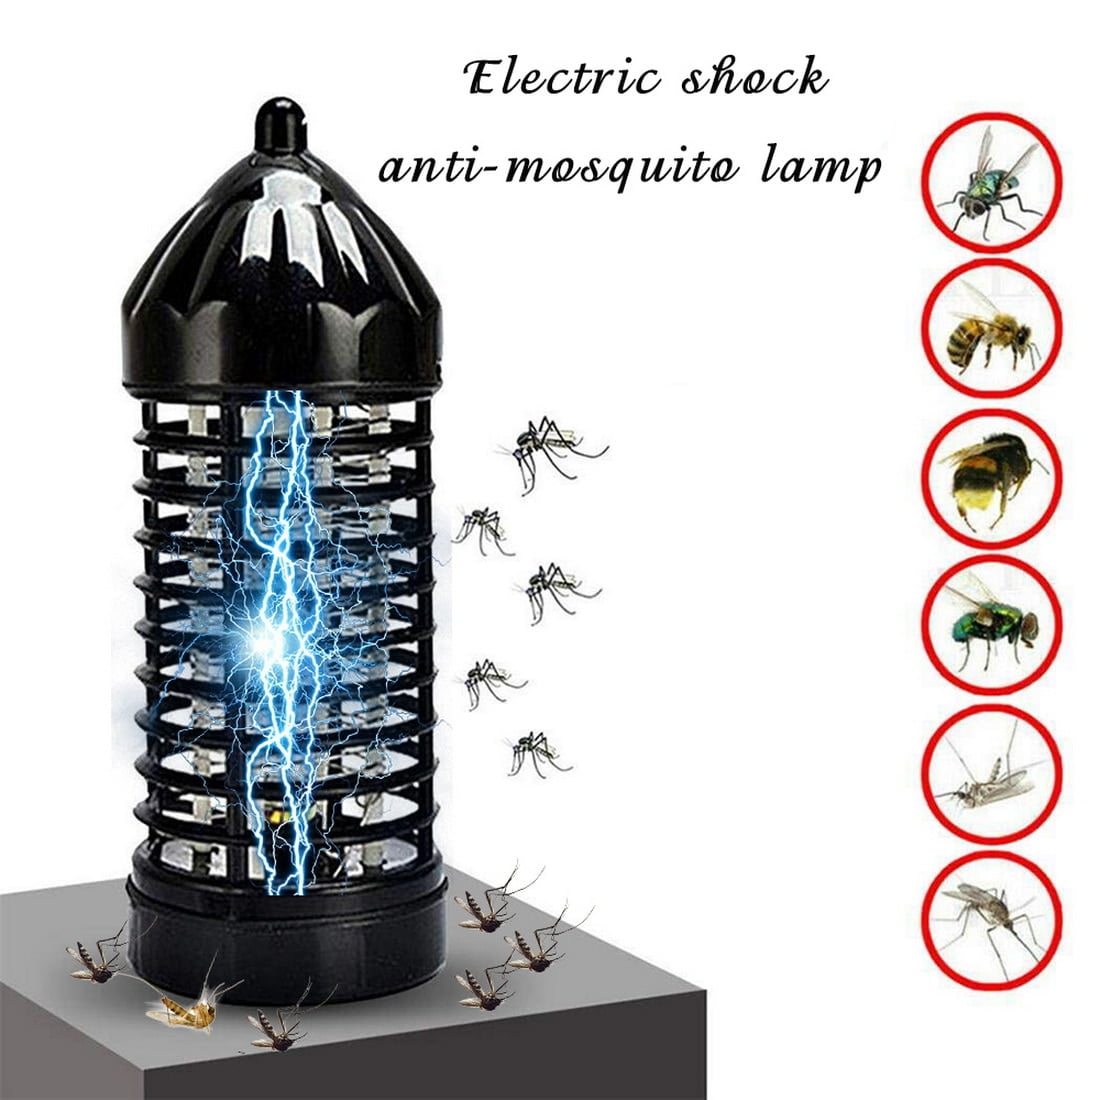 Mosquito Fly Bug Insect Zapper Killer Indoor Outdoor Electronic Trap Lamp 731015167401 